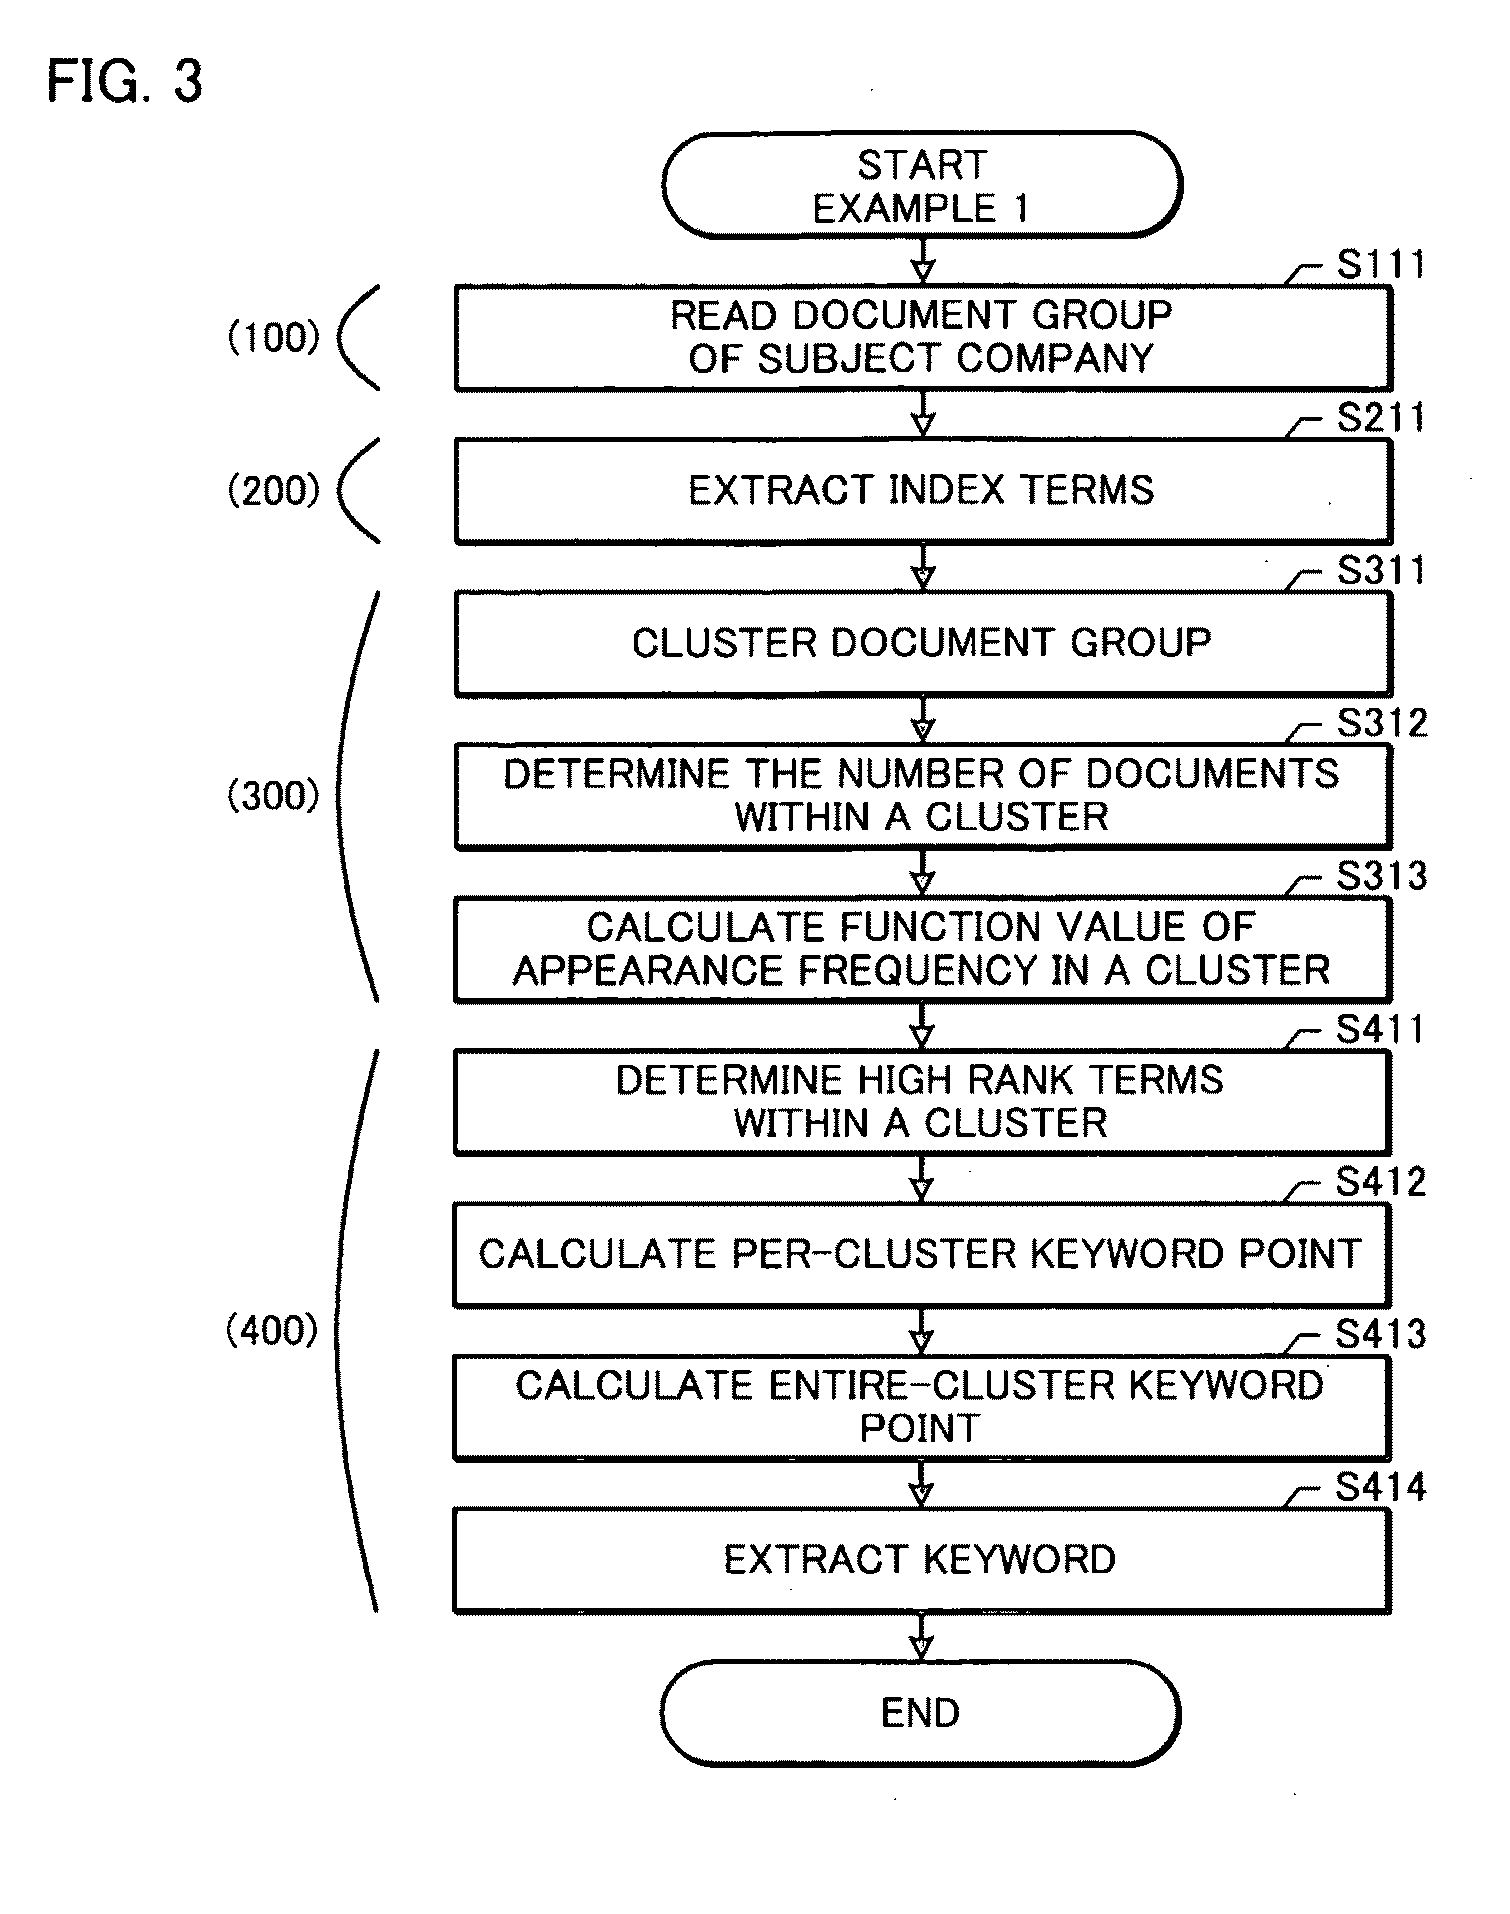 Company Technical Document Group Analysis Supporting Device